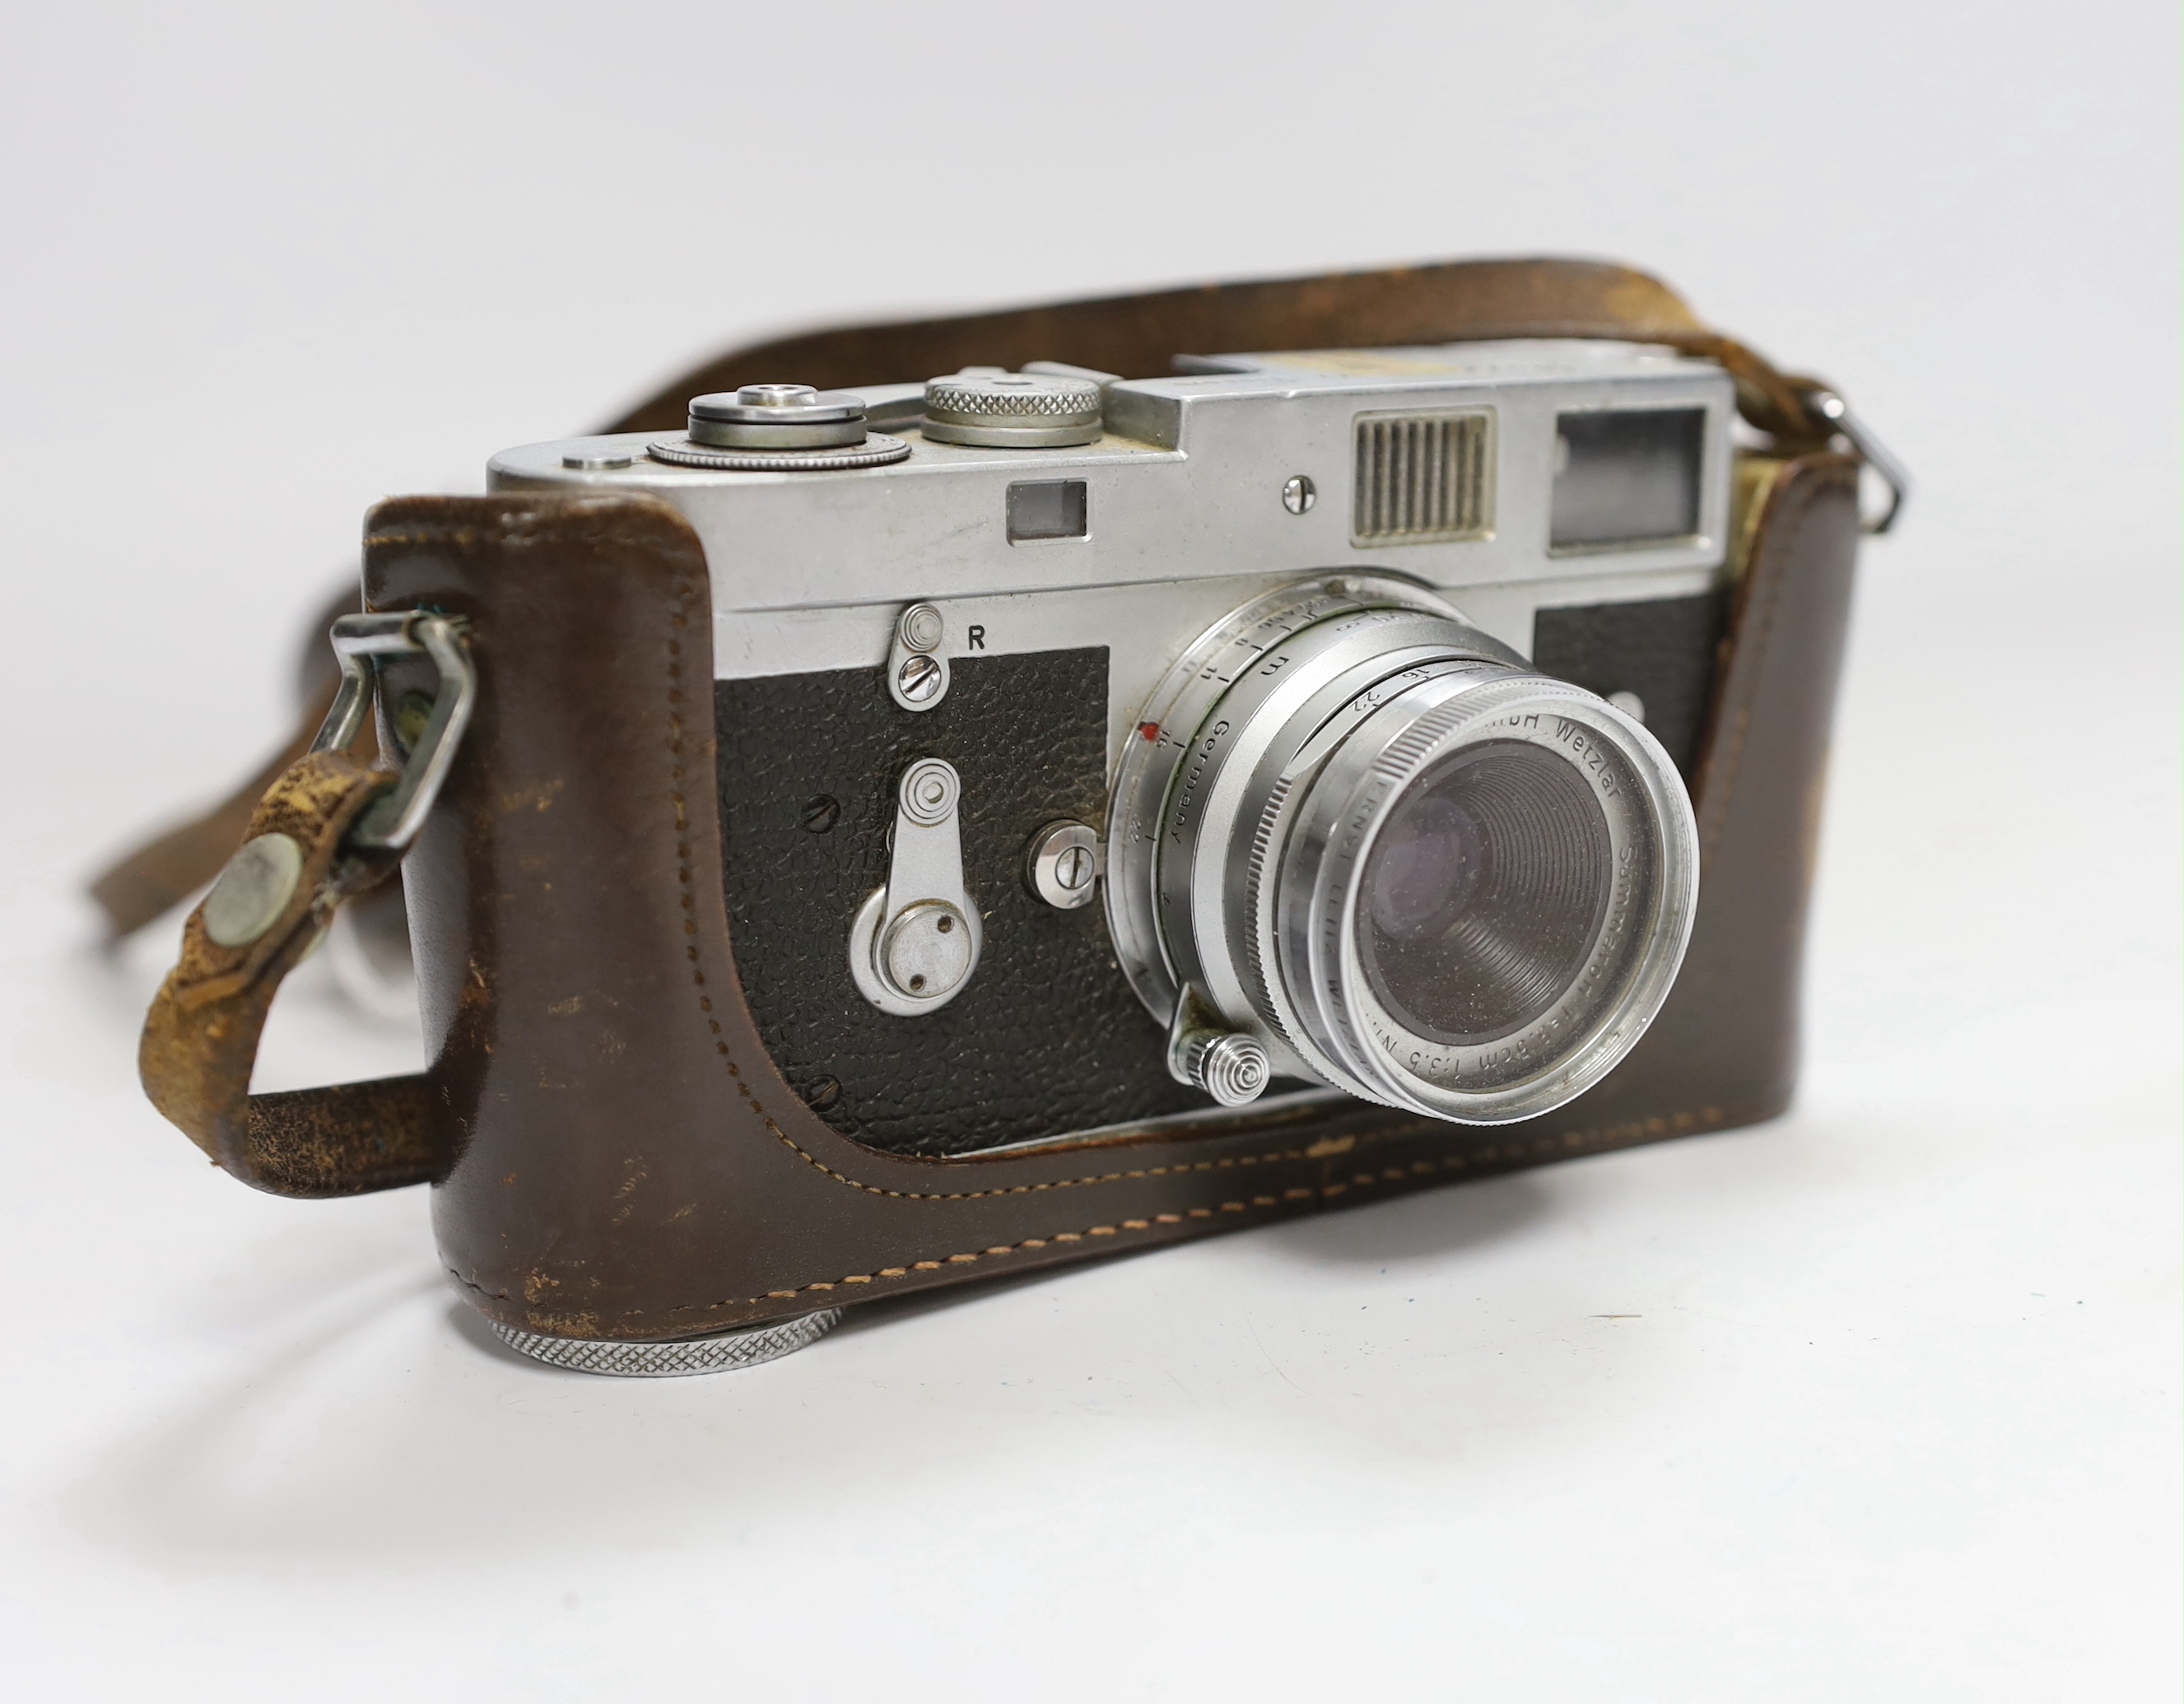 A Leica M2 camera, serial no. 1104070, c.1965, with Summaron f=3.5cm 1:3.5 lens, with leather case and strap